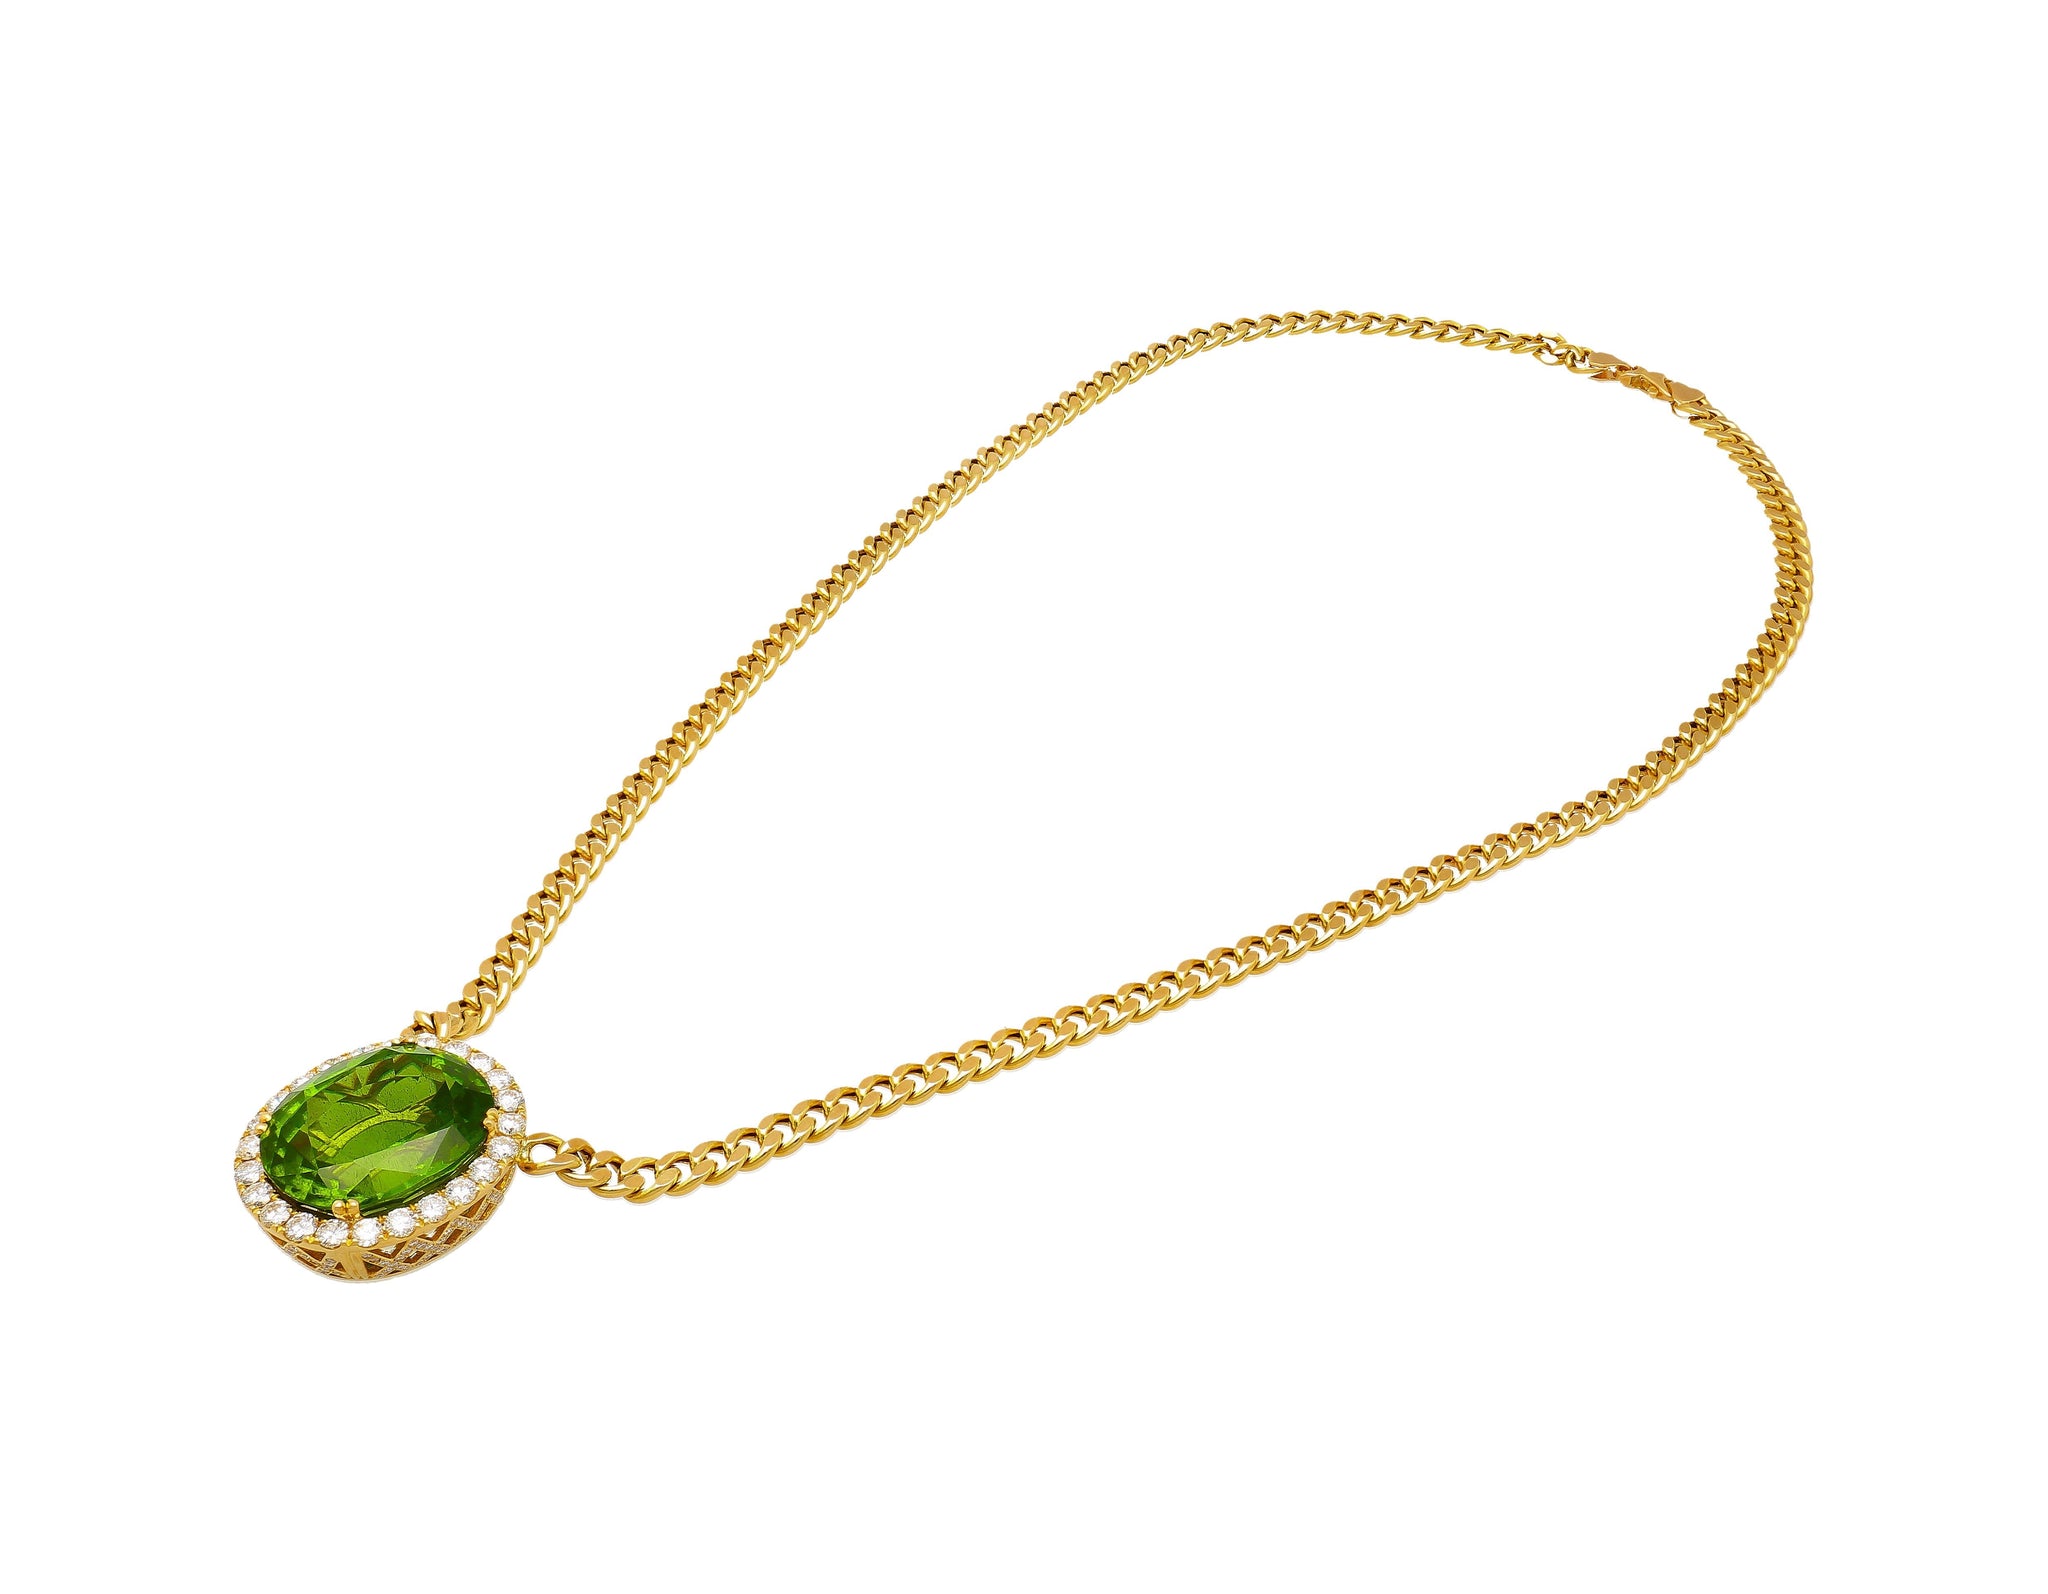 GRS Certified 51 carat Green Oval Cut Peridot with Diamond Halo in 18K Gold Cuban Chain Setting Pendant Necklace